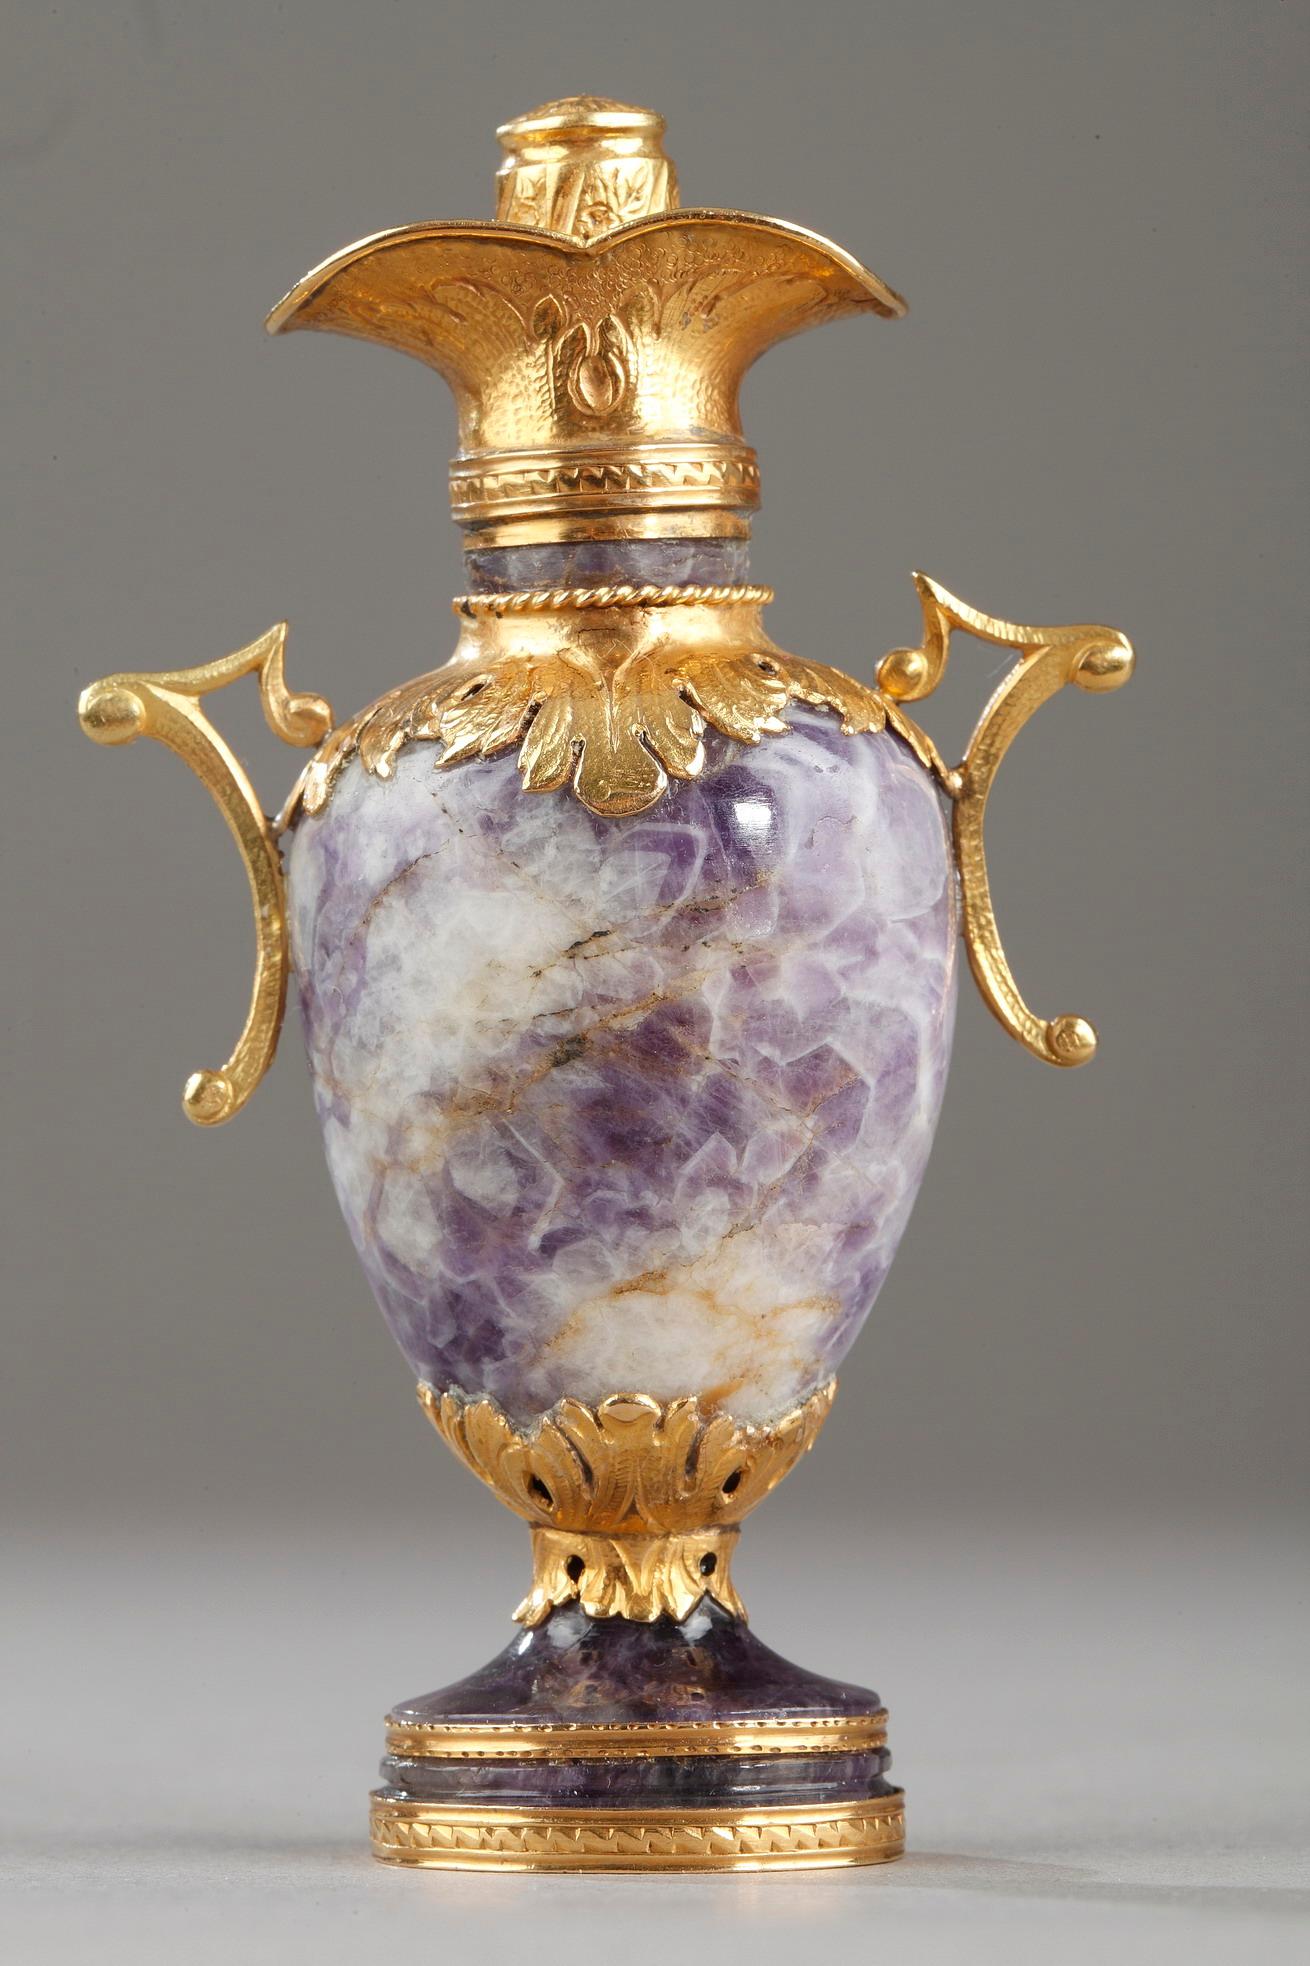 Piriform perfum bottle in amethyst. The body of the bottle is made of a hard stone, the amethyst set in a gold mount with bent handles and chiselled acanthus leaves. Rare in the 18th century, it comes mainly from Brazil. In the 18th century and